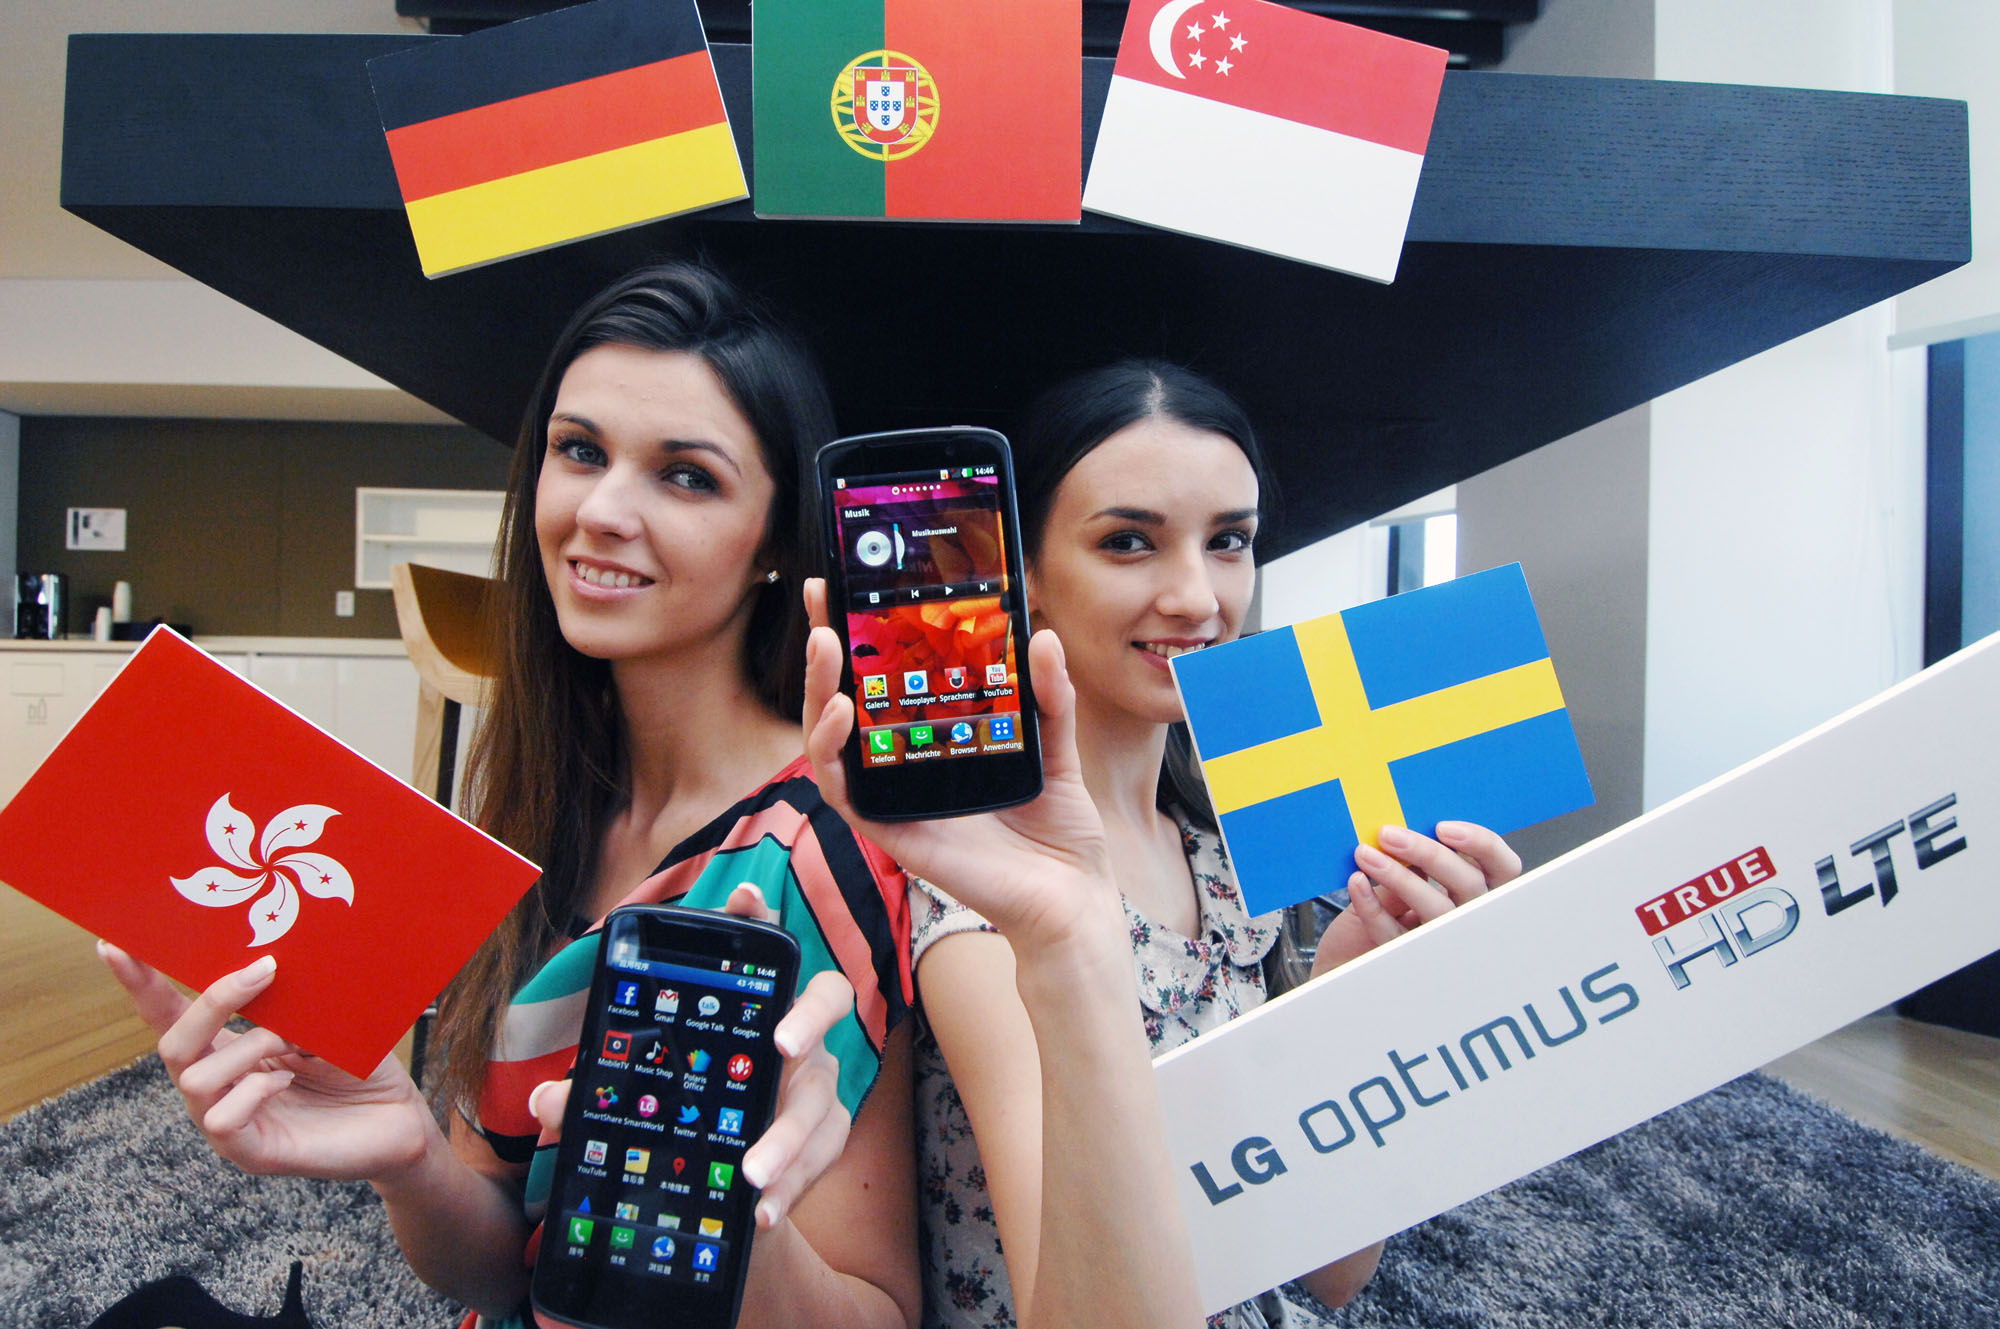 A model holding a Hong Kong flag and the LG Optimus HD LTE while another holds up the flag of Sweden and another LG Optimus HD LTE, all while in front of the Germany, Portugal and Singapore flags